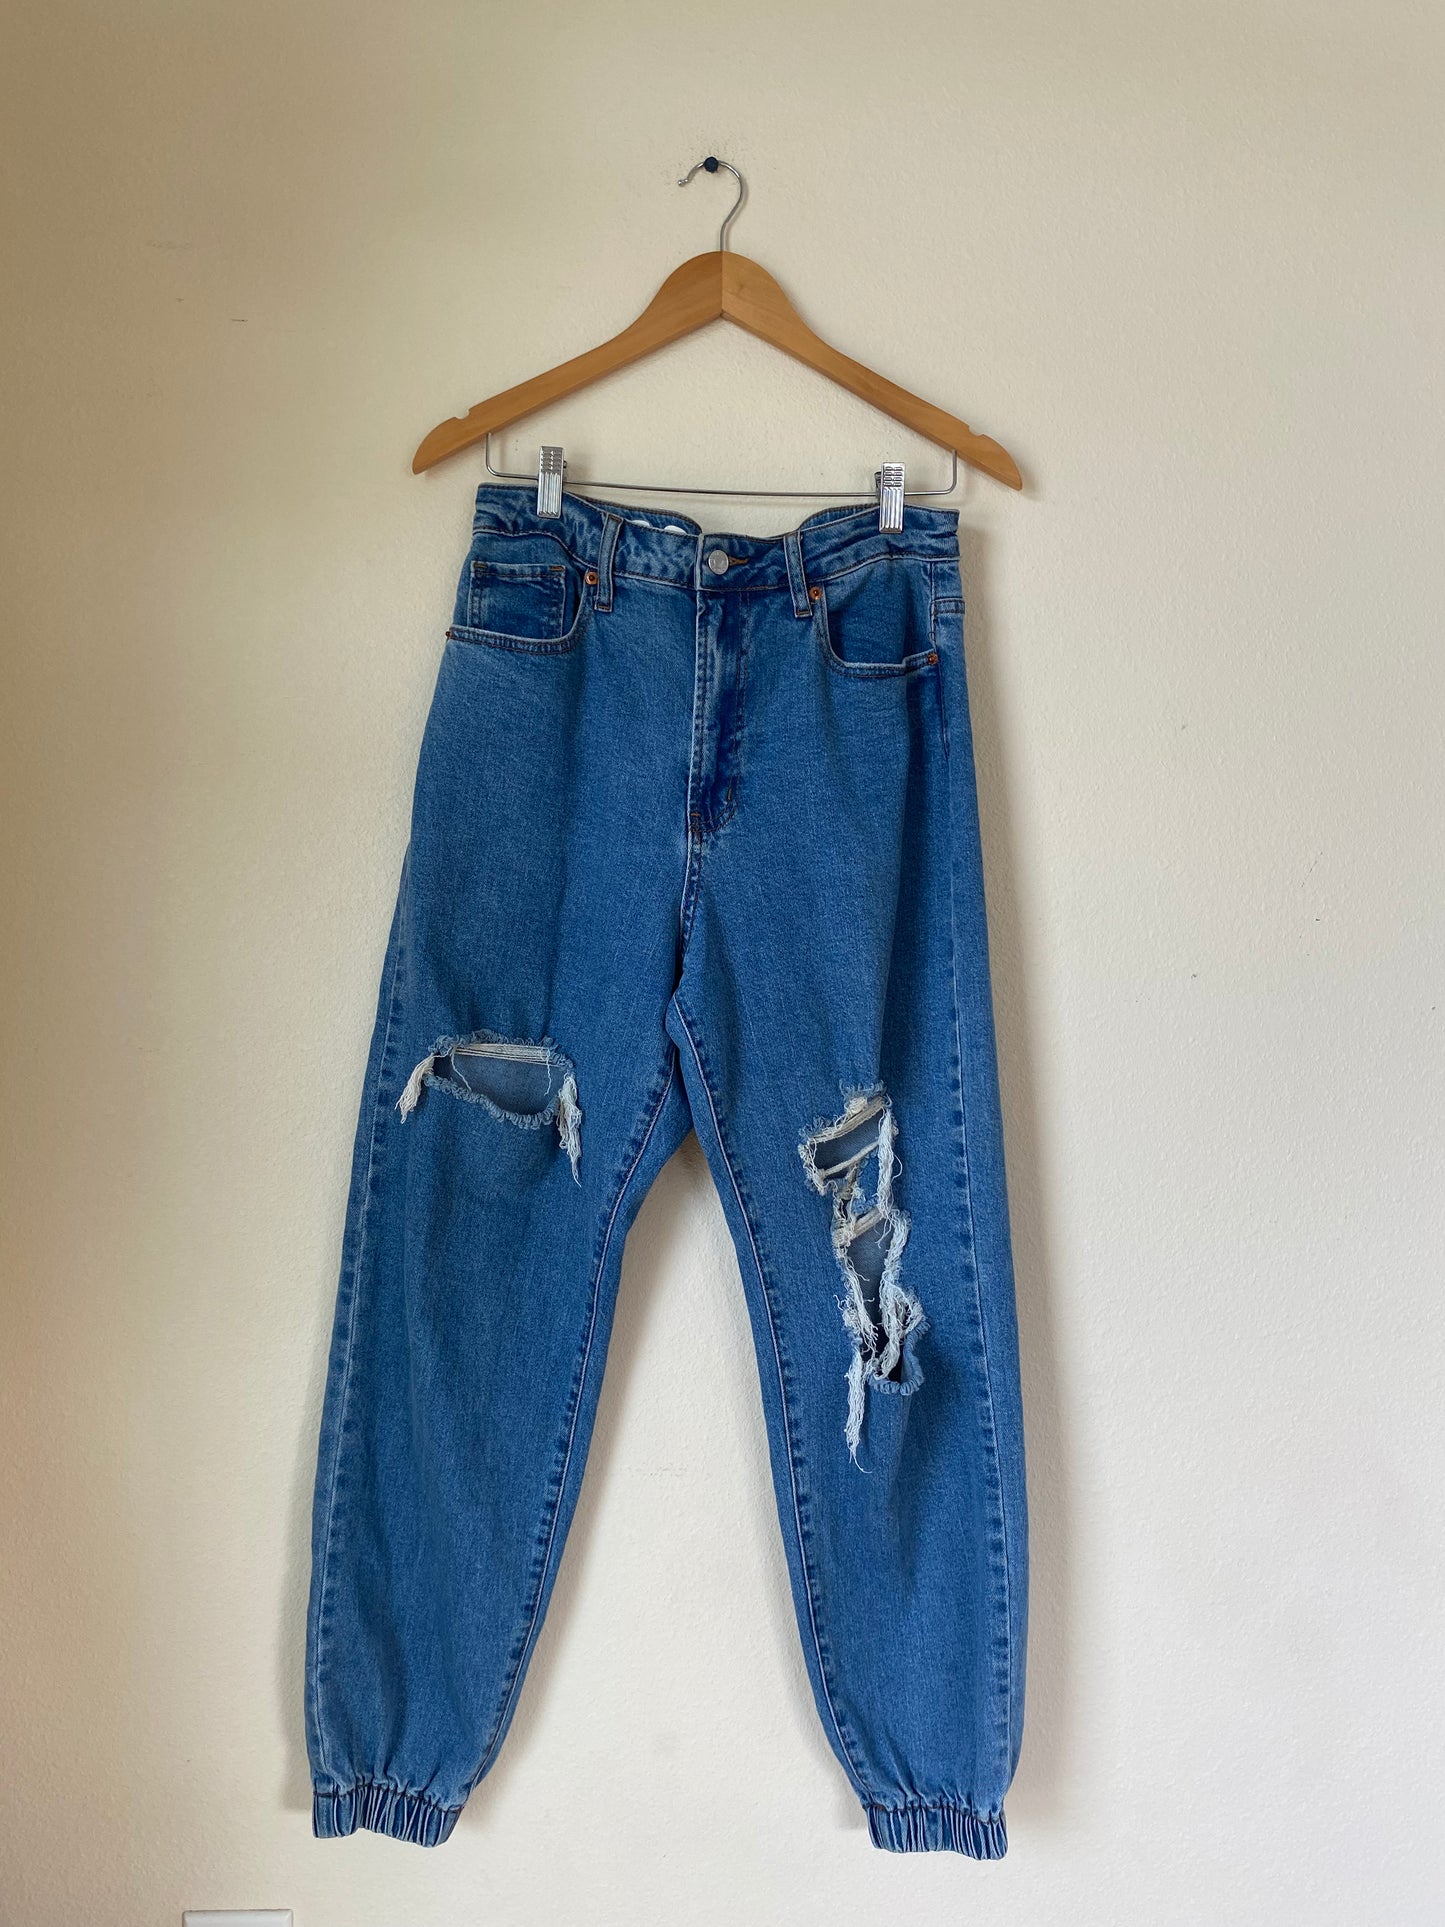 Distressed Jean Joggers SIZE 29